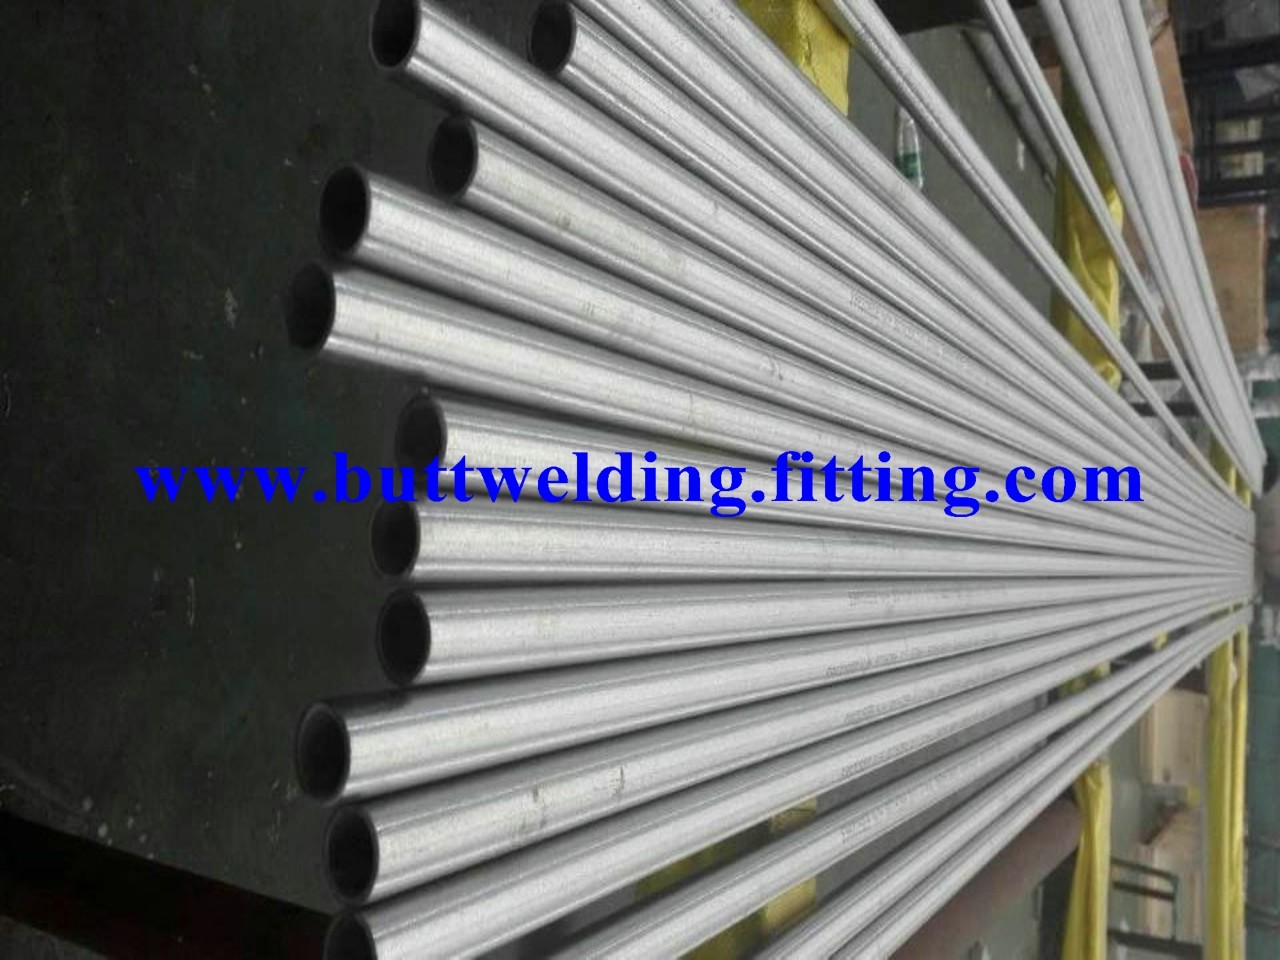 Cold finished ASTM A268 TP410 12%Cr Stainless Steel Seamless Pipe 1/2